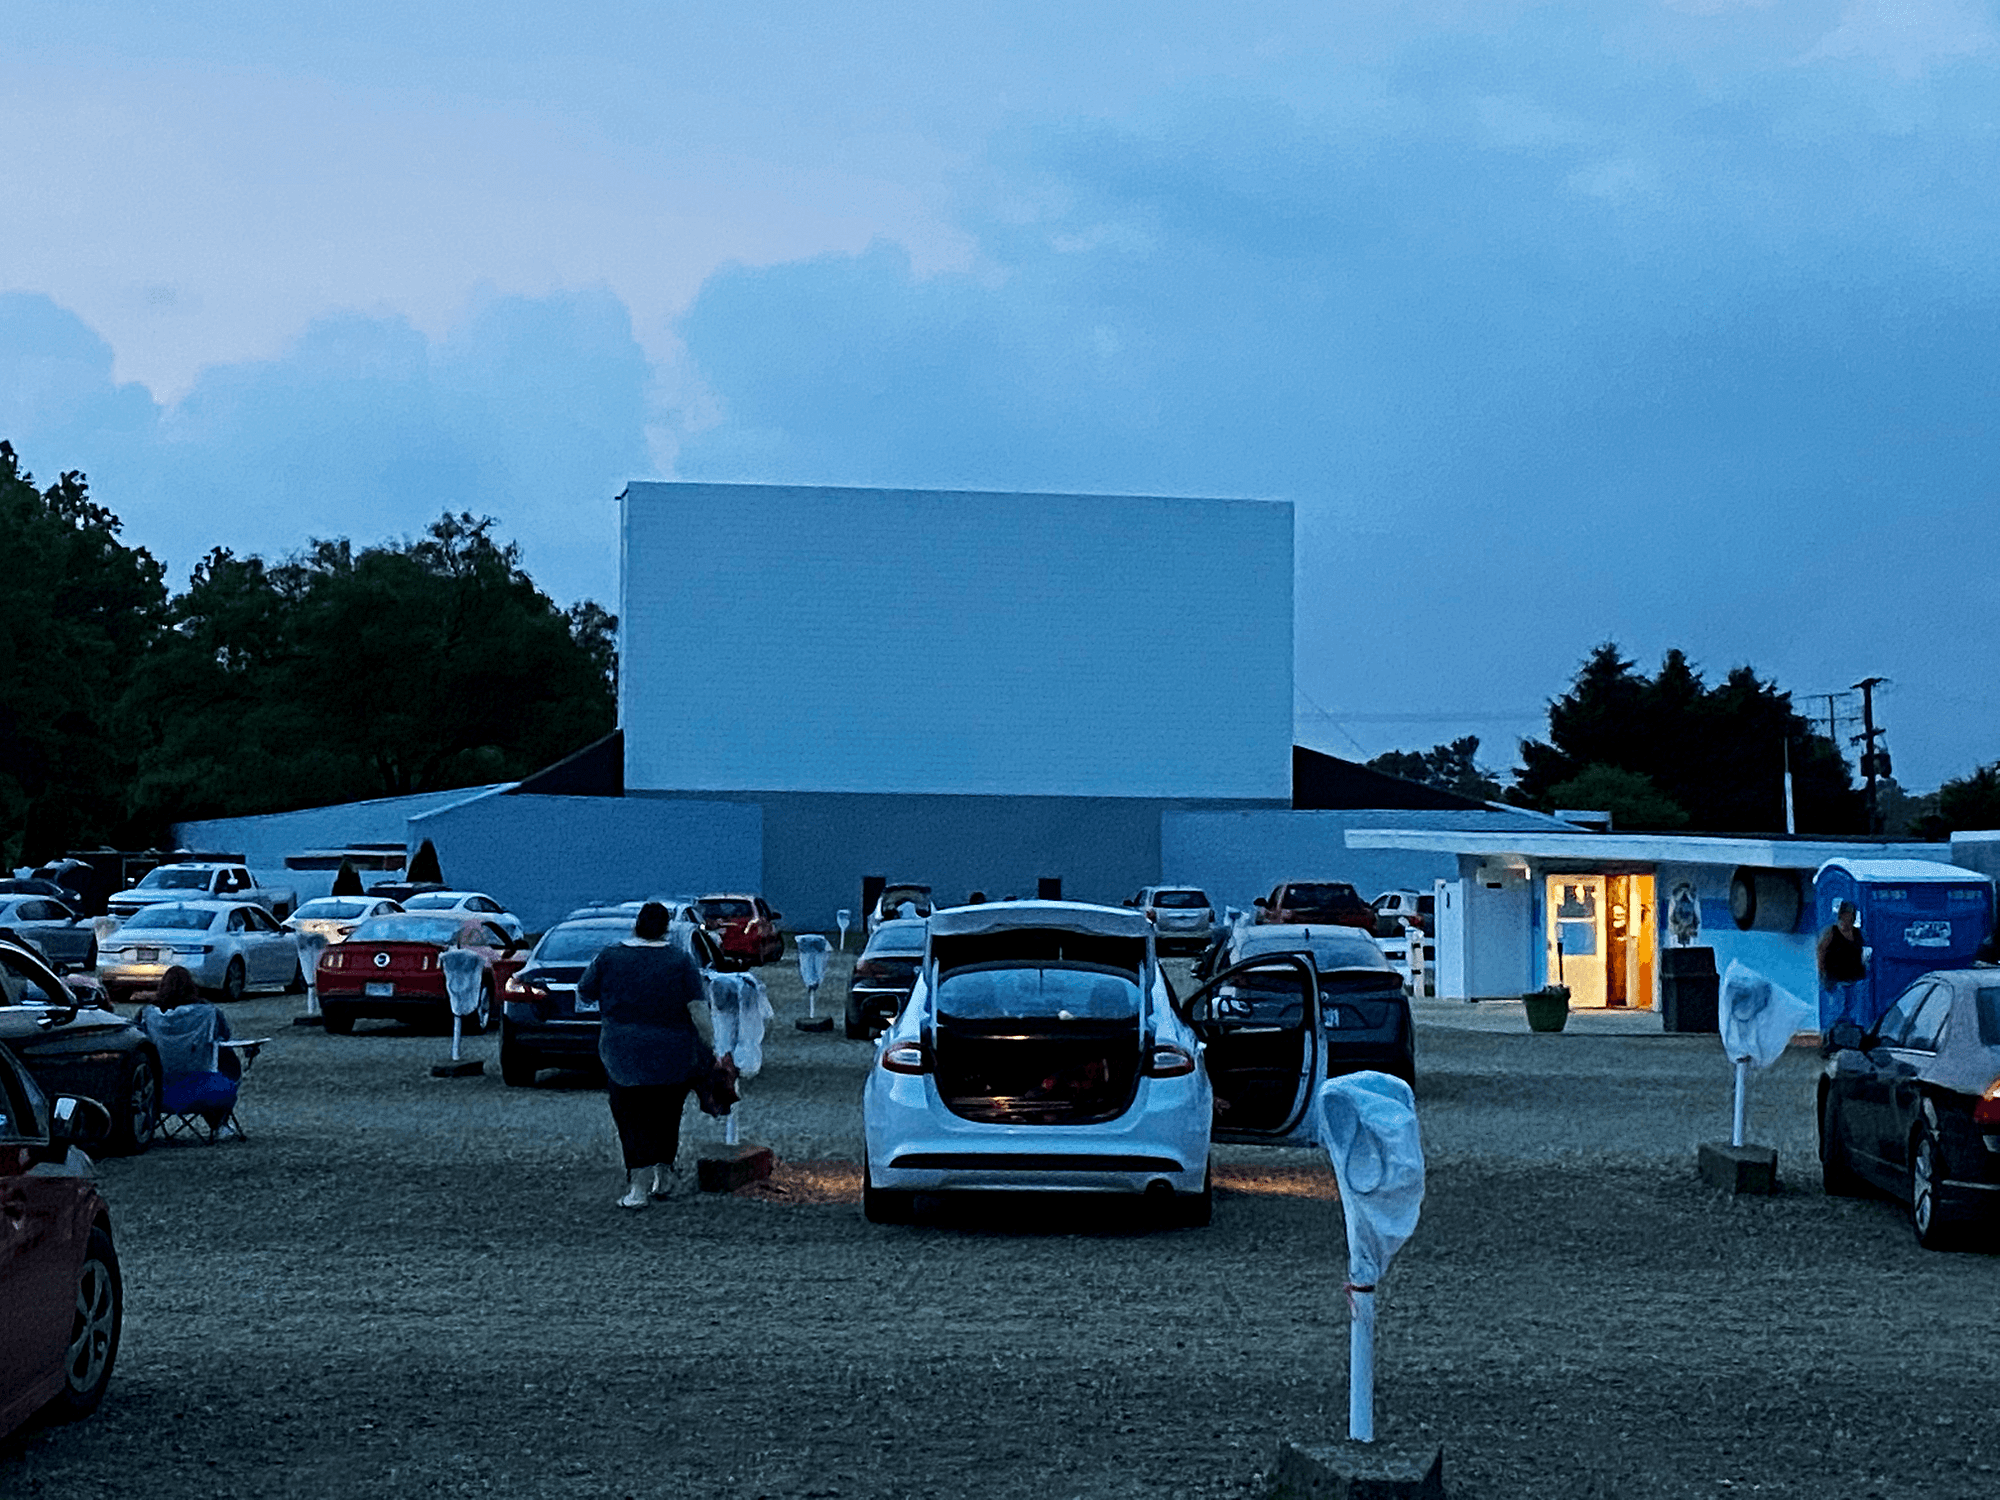 Nostolgic Drive-In Theater, Ohio | Drive-In Theater | EarthScaper Travel Blog | Skyview Drive-In Theater